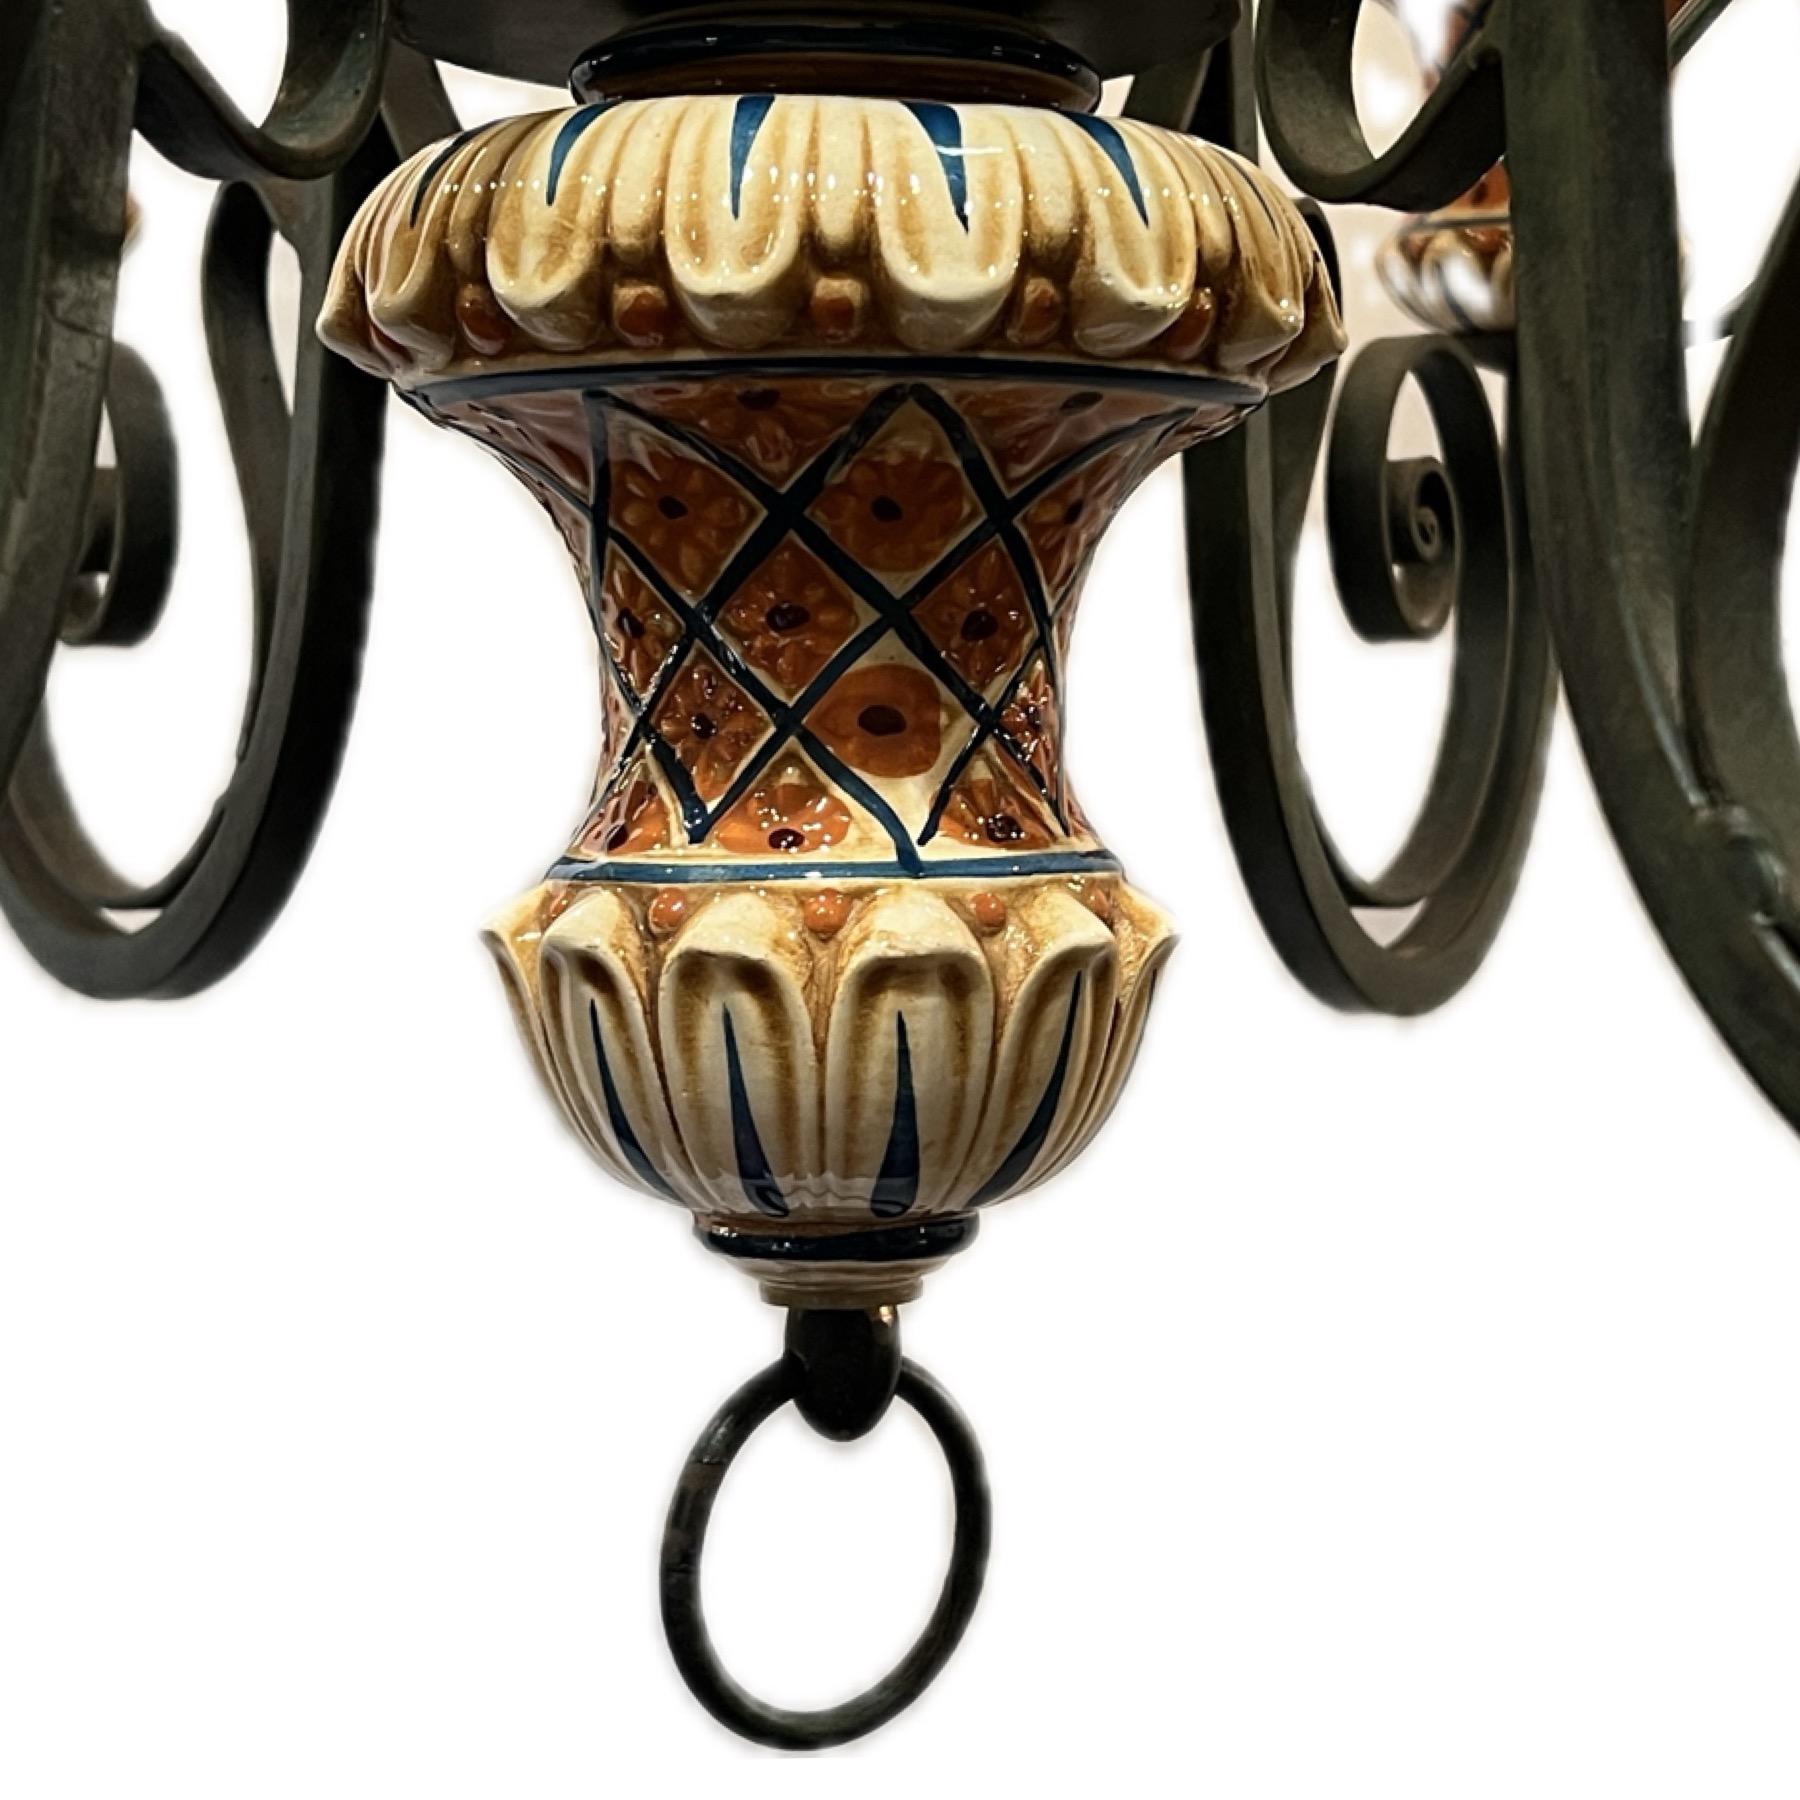 20th Century Estate Wrought Iron and Porcelain 6 Light Chandelier, Circa 1950’s-1960's. For Sale